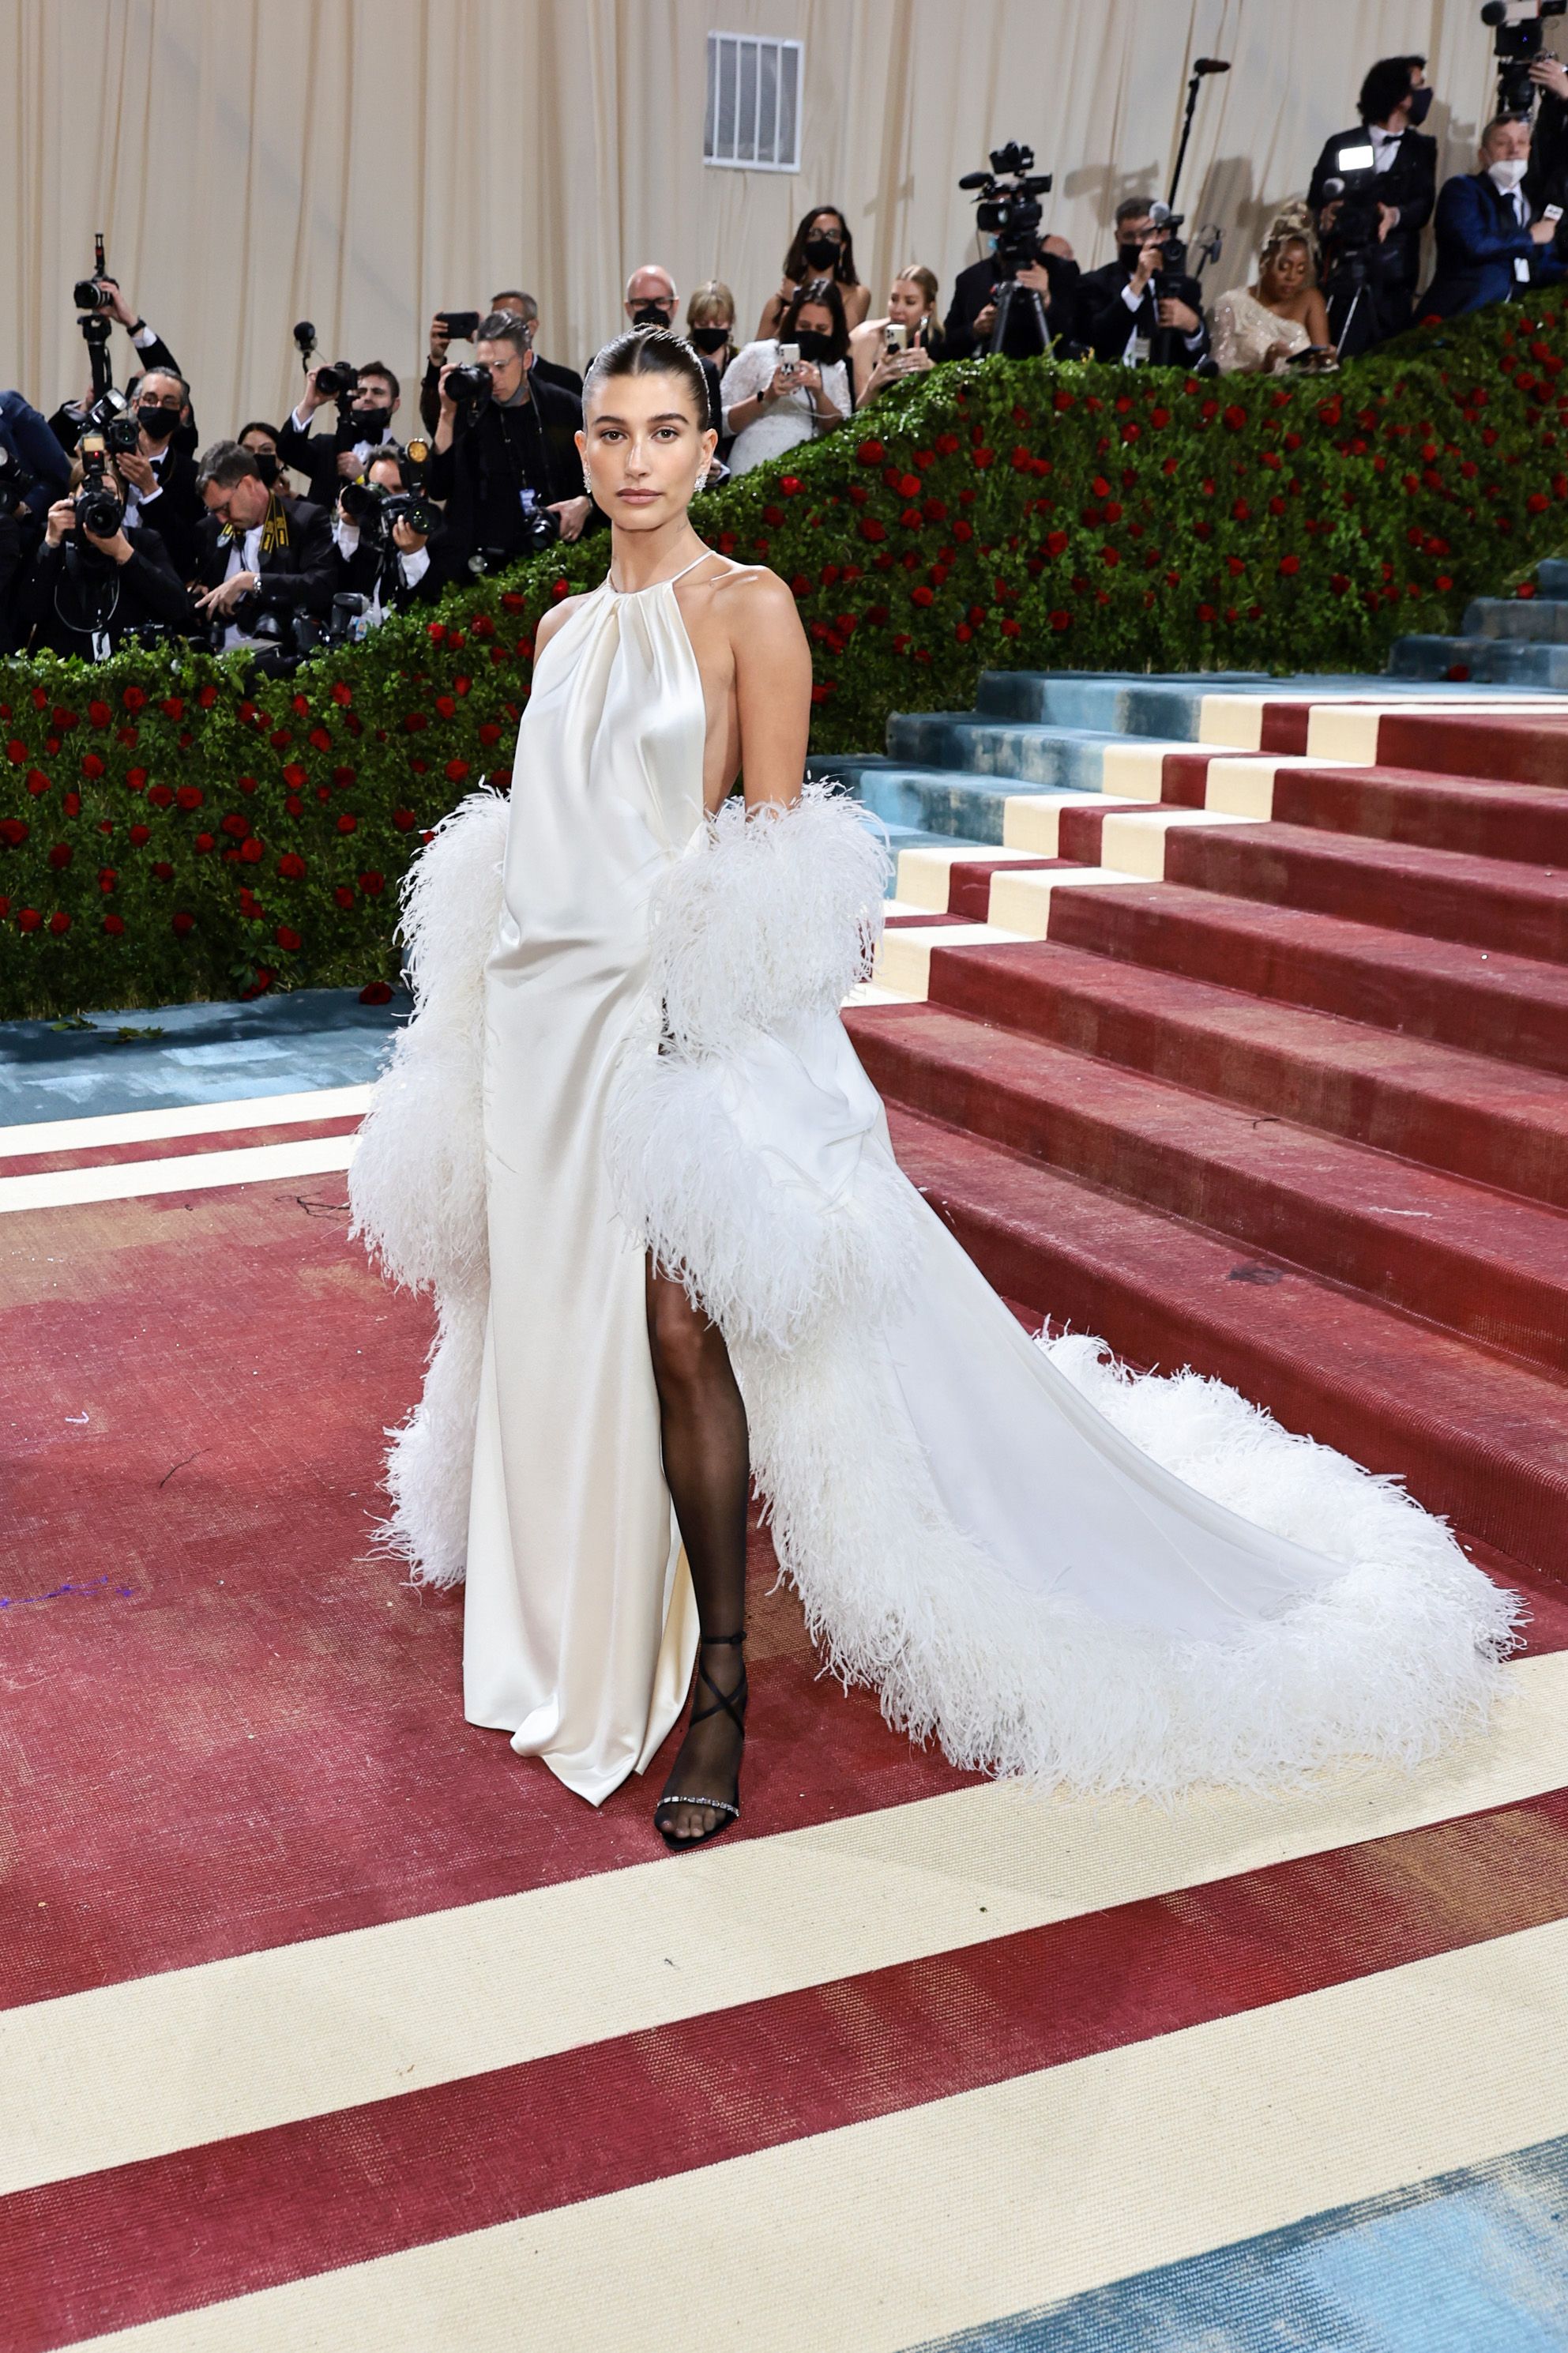 Netizens criticise Met Gala 2022 for choosing 'Gilded Glamour' as